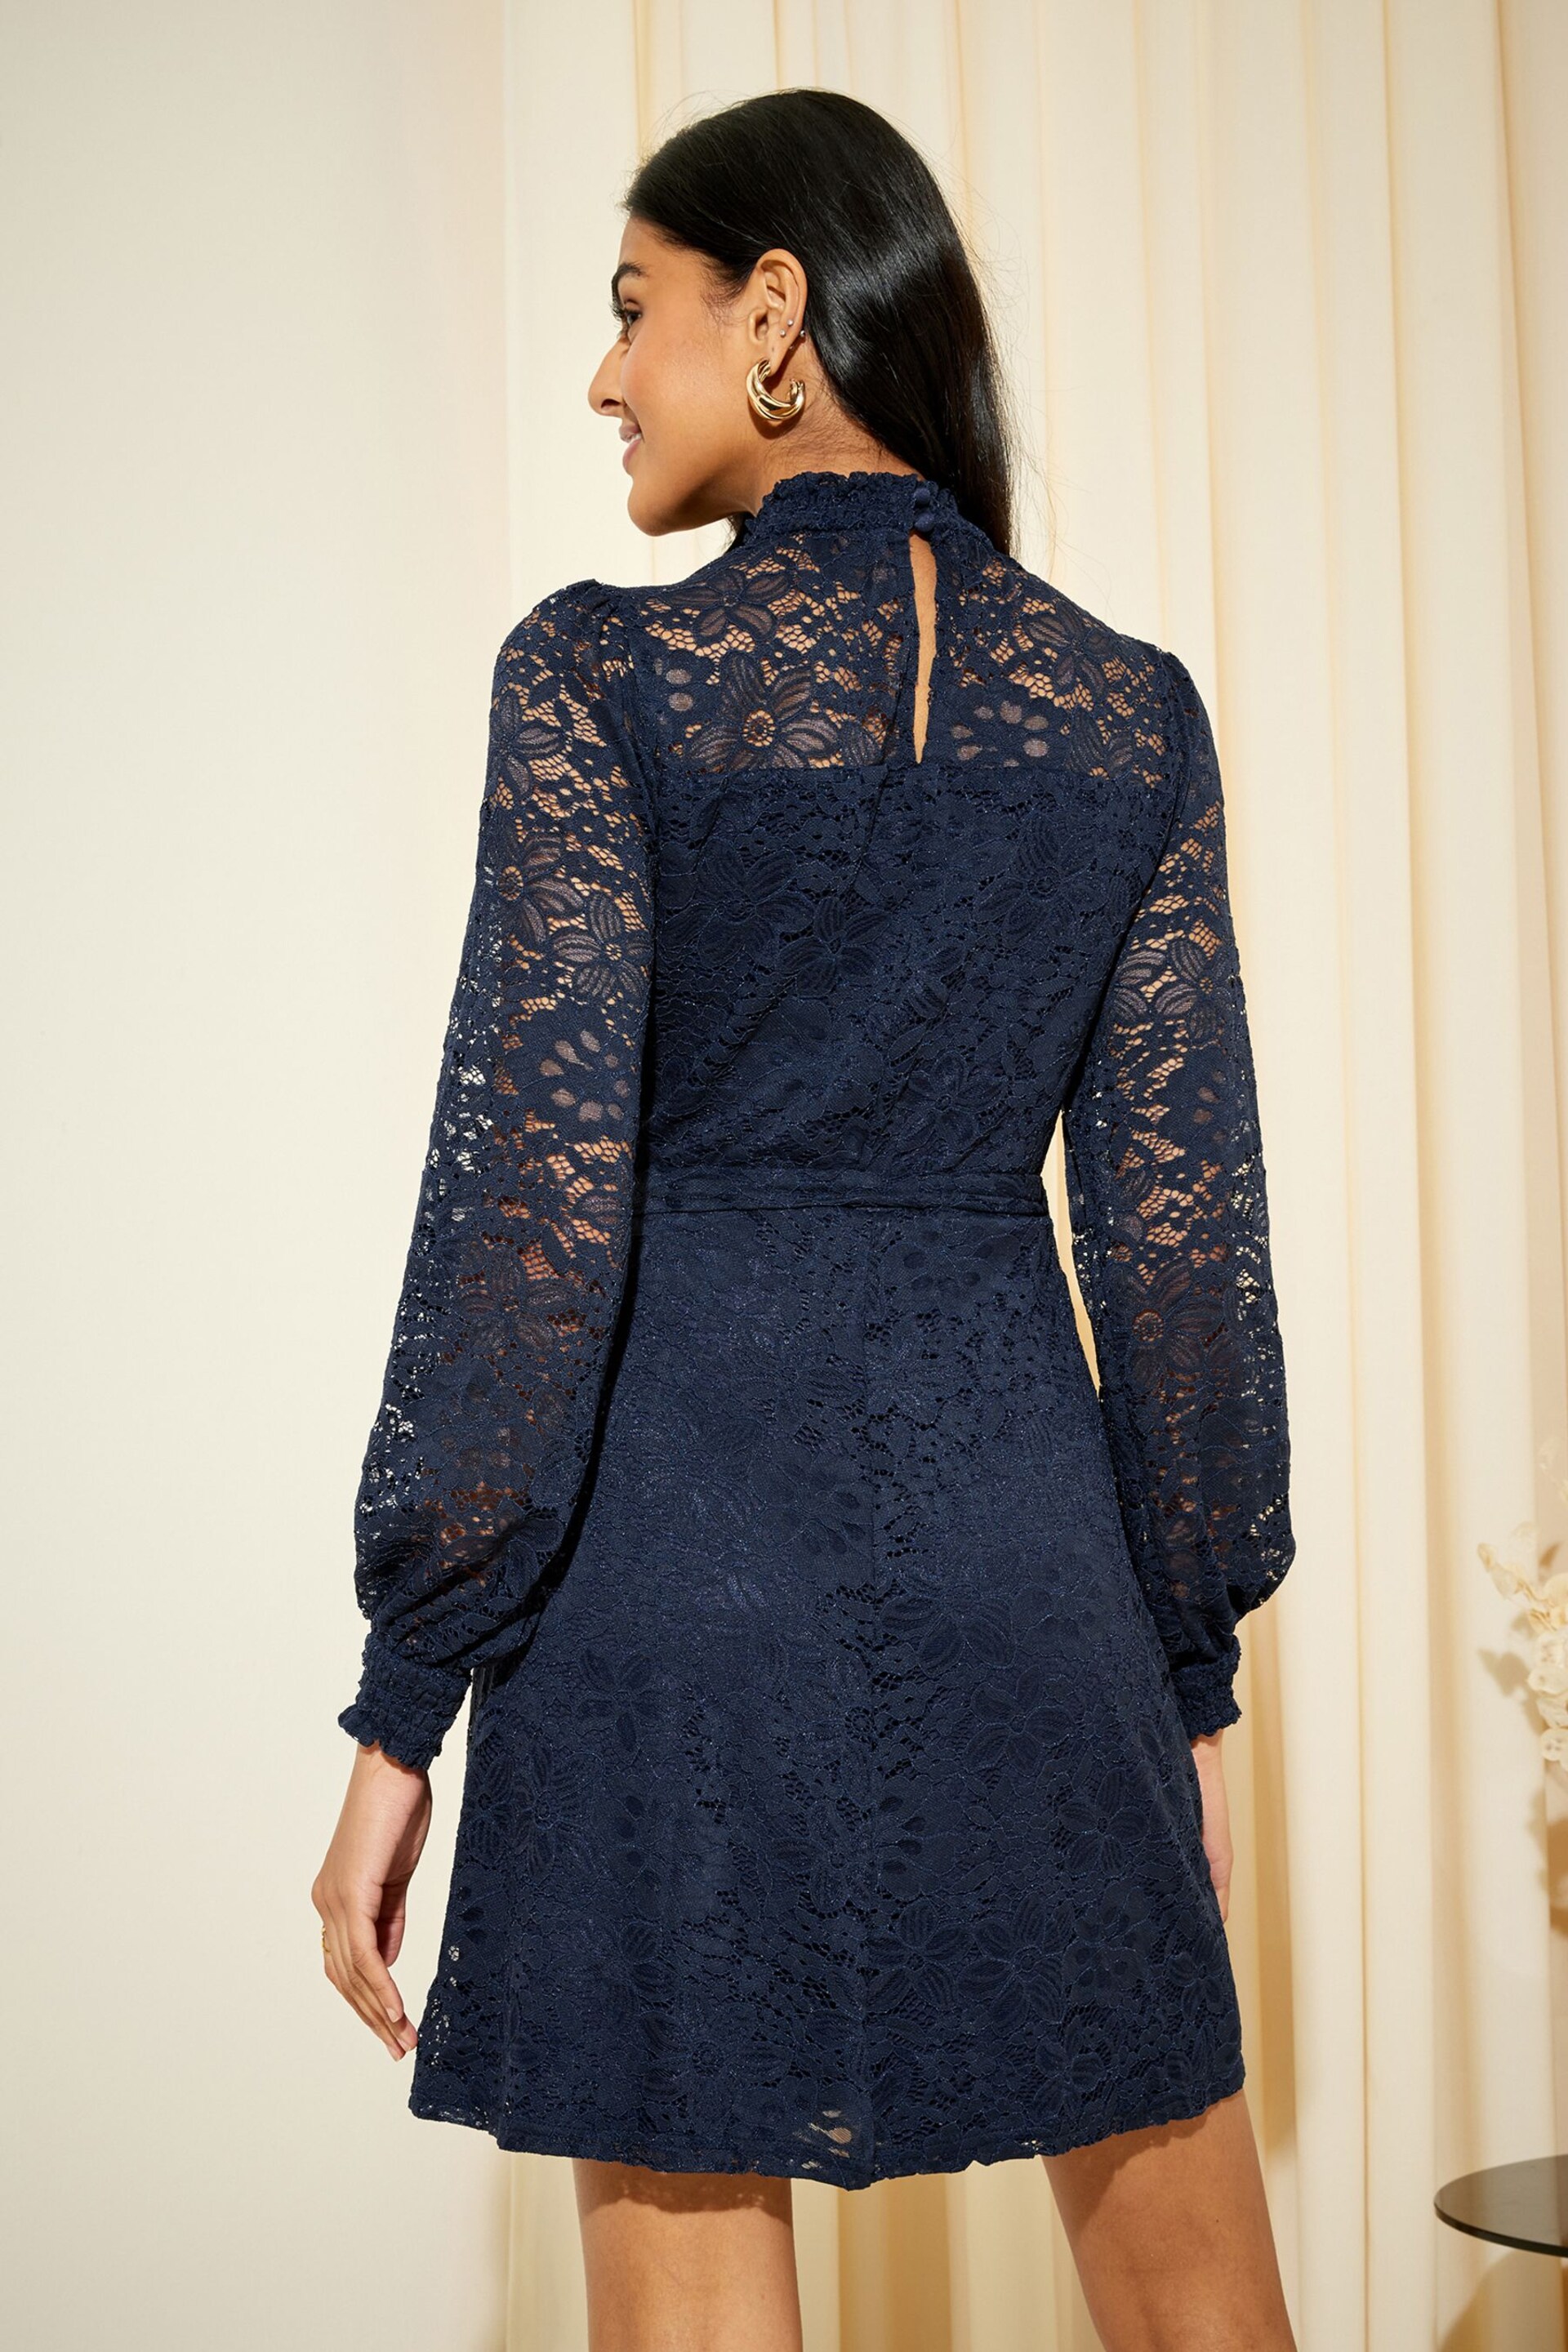 Friends Like These Navy Blue Long Sleeve Lace Mini Dress - Image 4 of 4